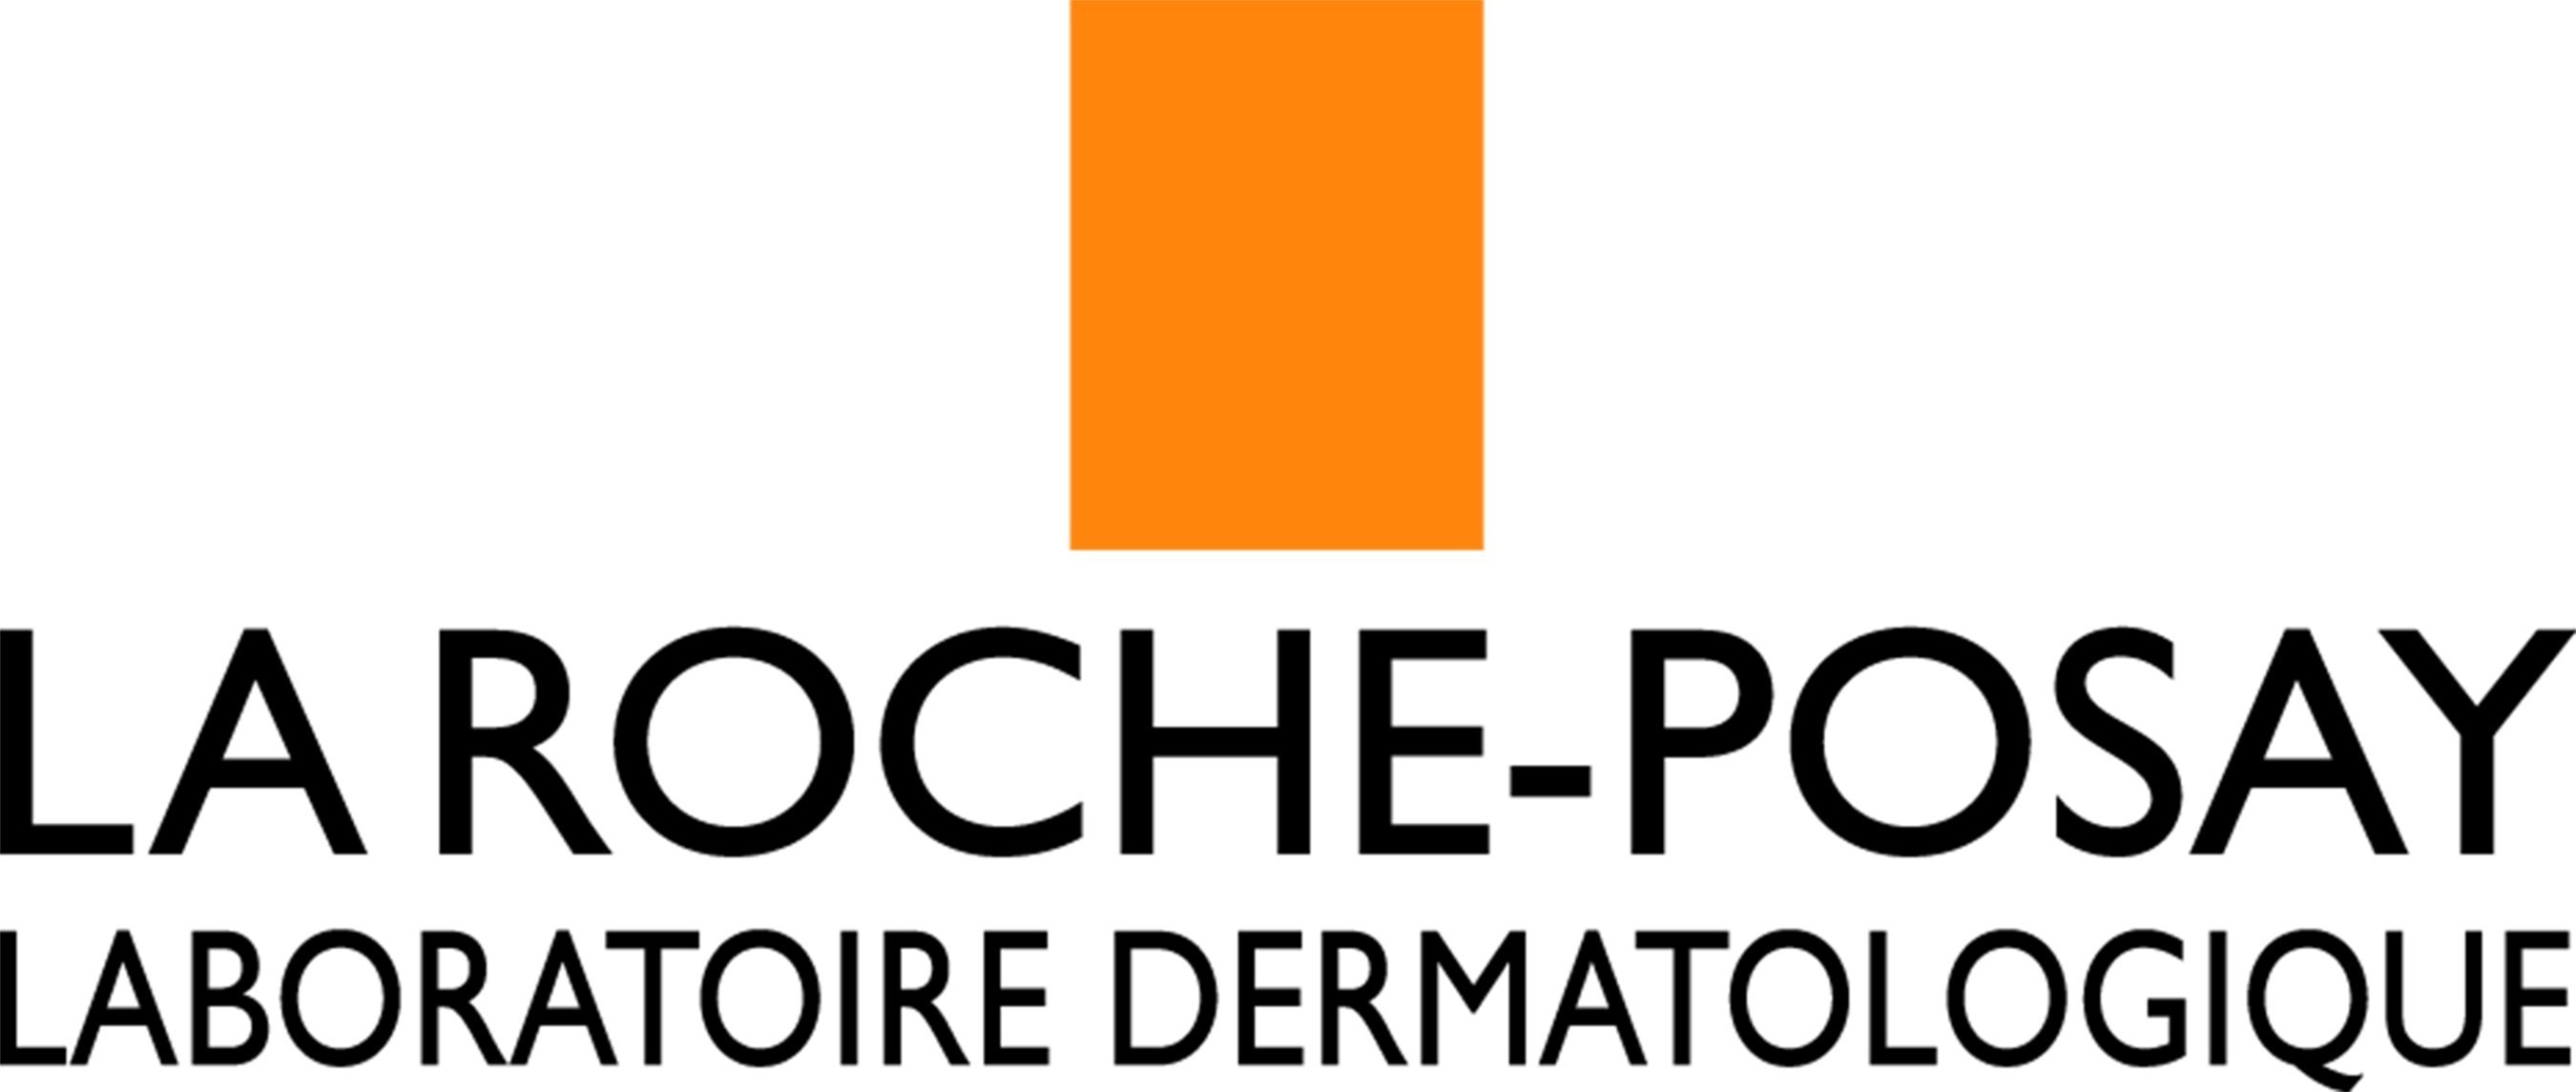 La Roche-Posay Promotes Year-Round Sun Protection for All Ages & Ethnicities